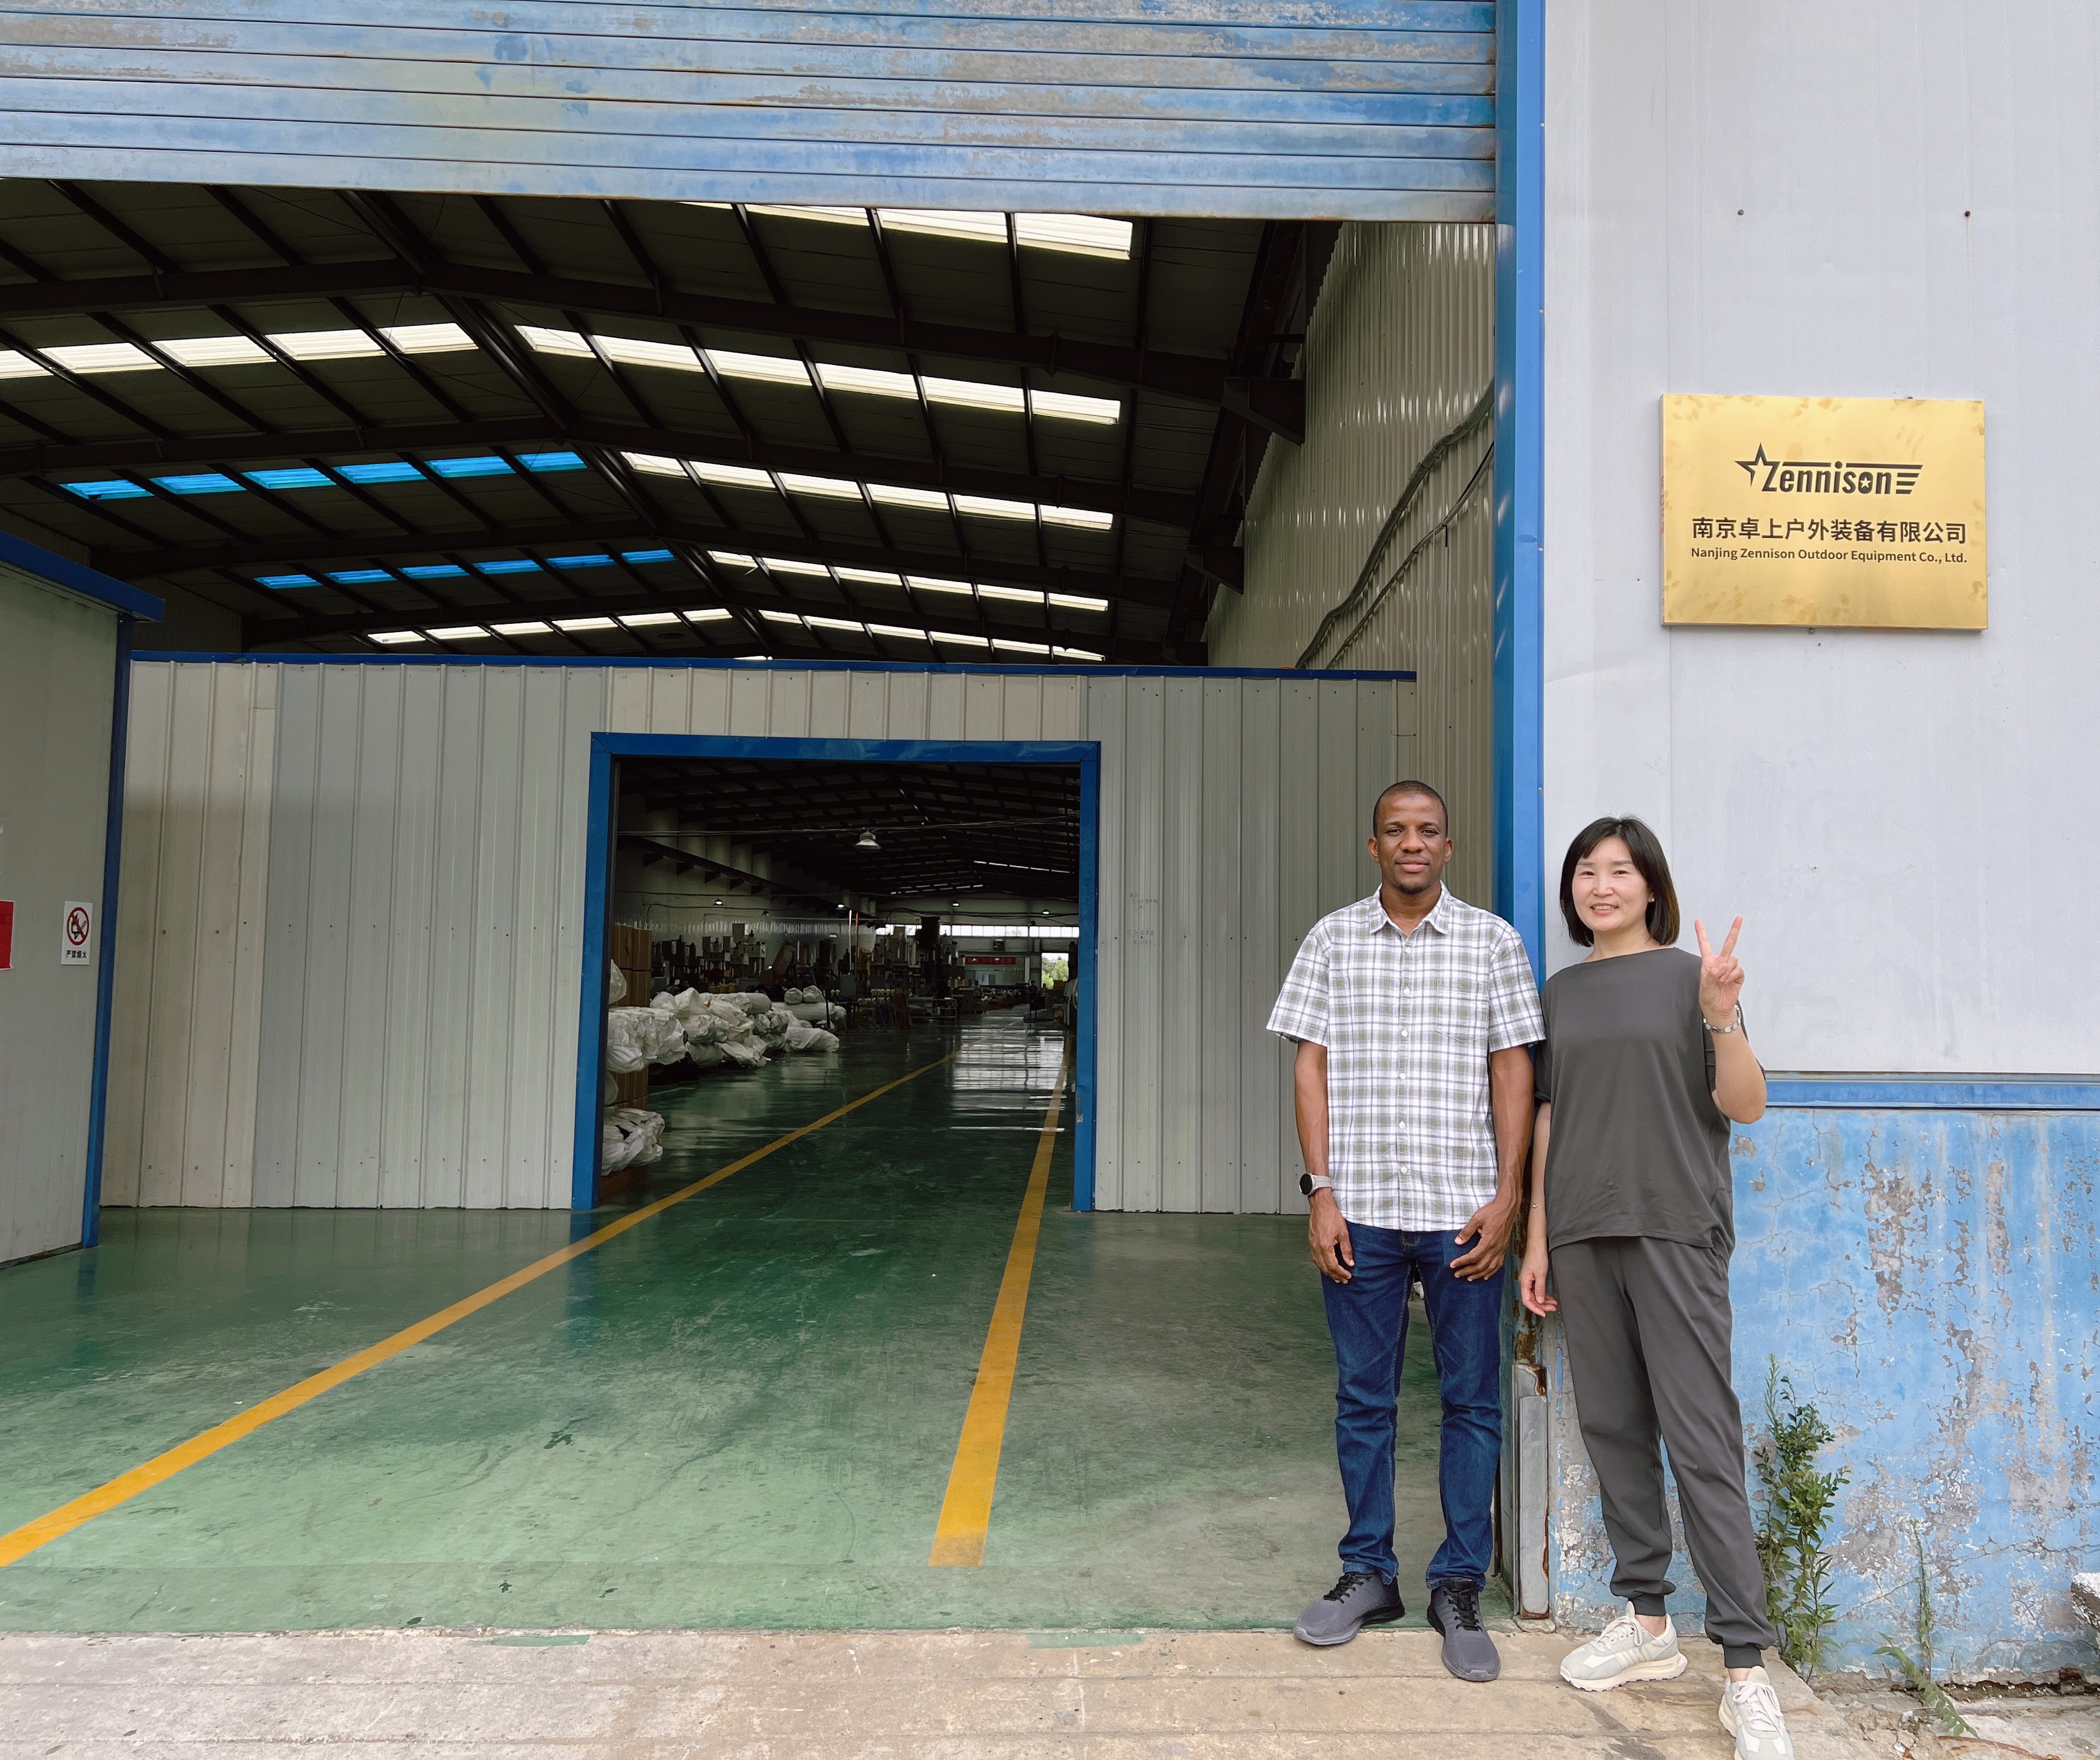 Zennison's Unforgettable Customer Visit from Nigeria: A Step Towards Global Expansion